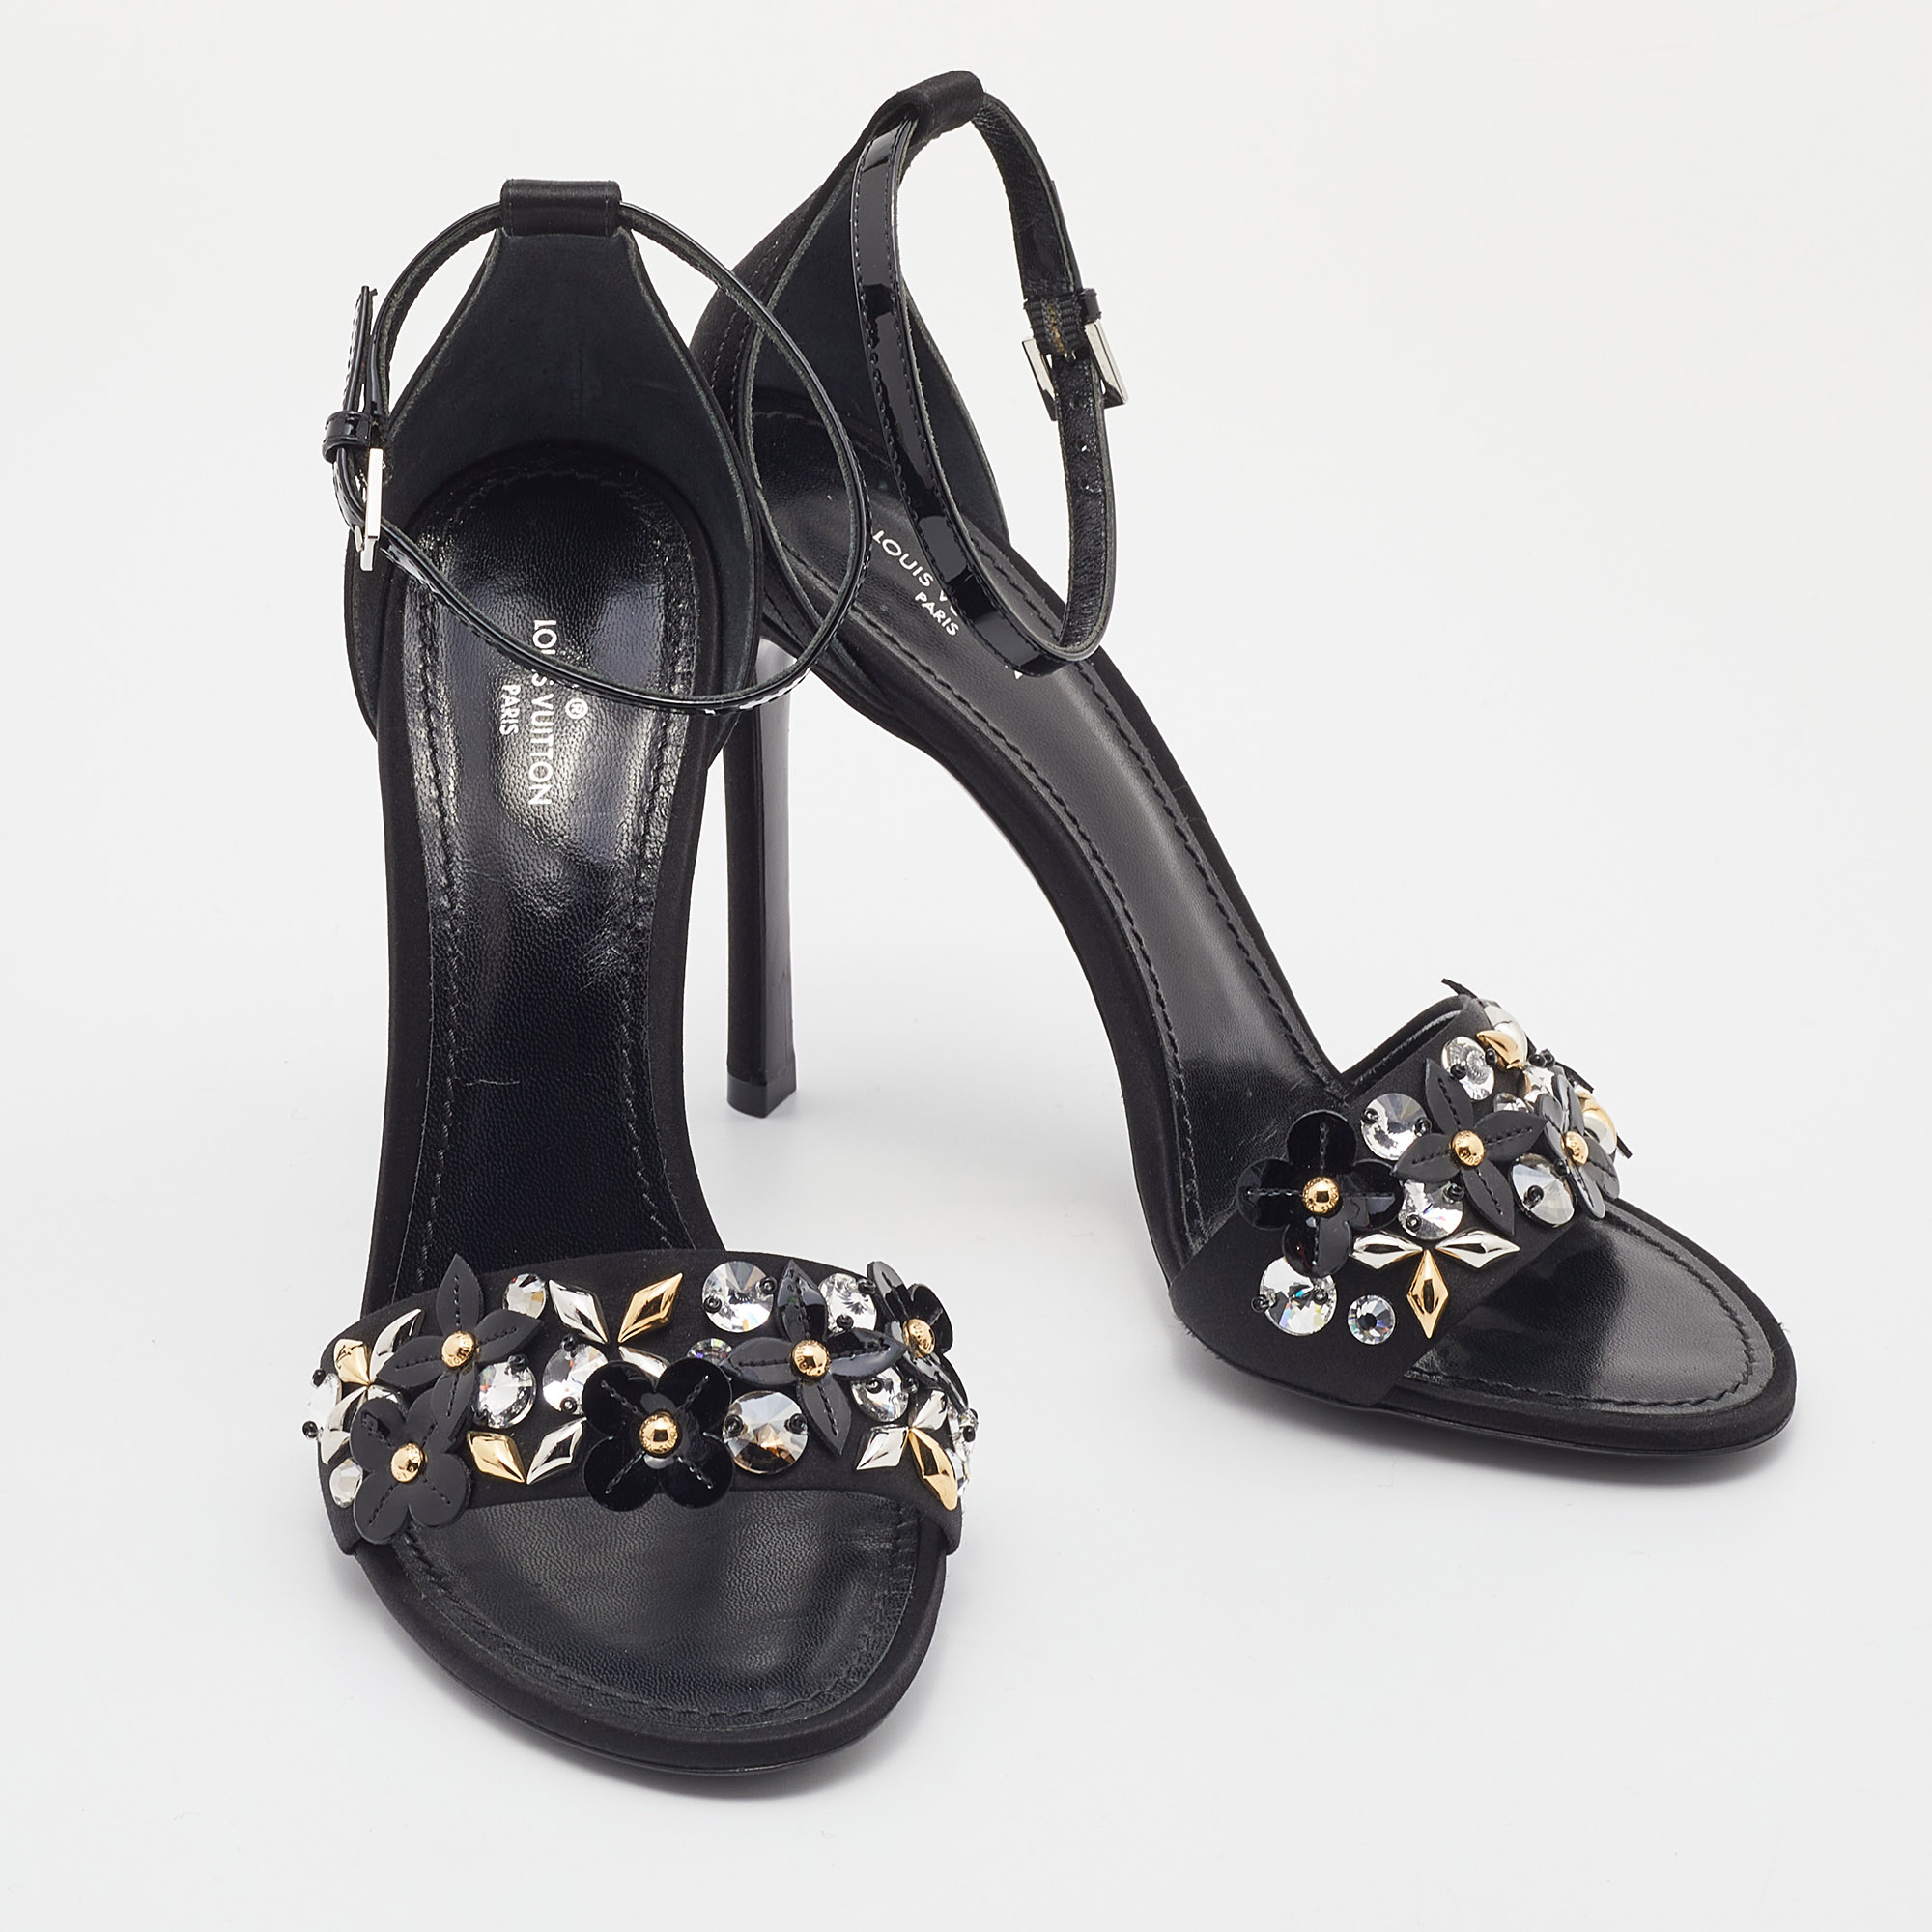 Louis Vuitton Black Satin And Patent Leather Embellished Ankle Strap Sandals Size 38.5